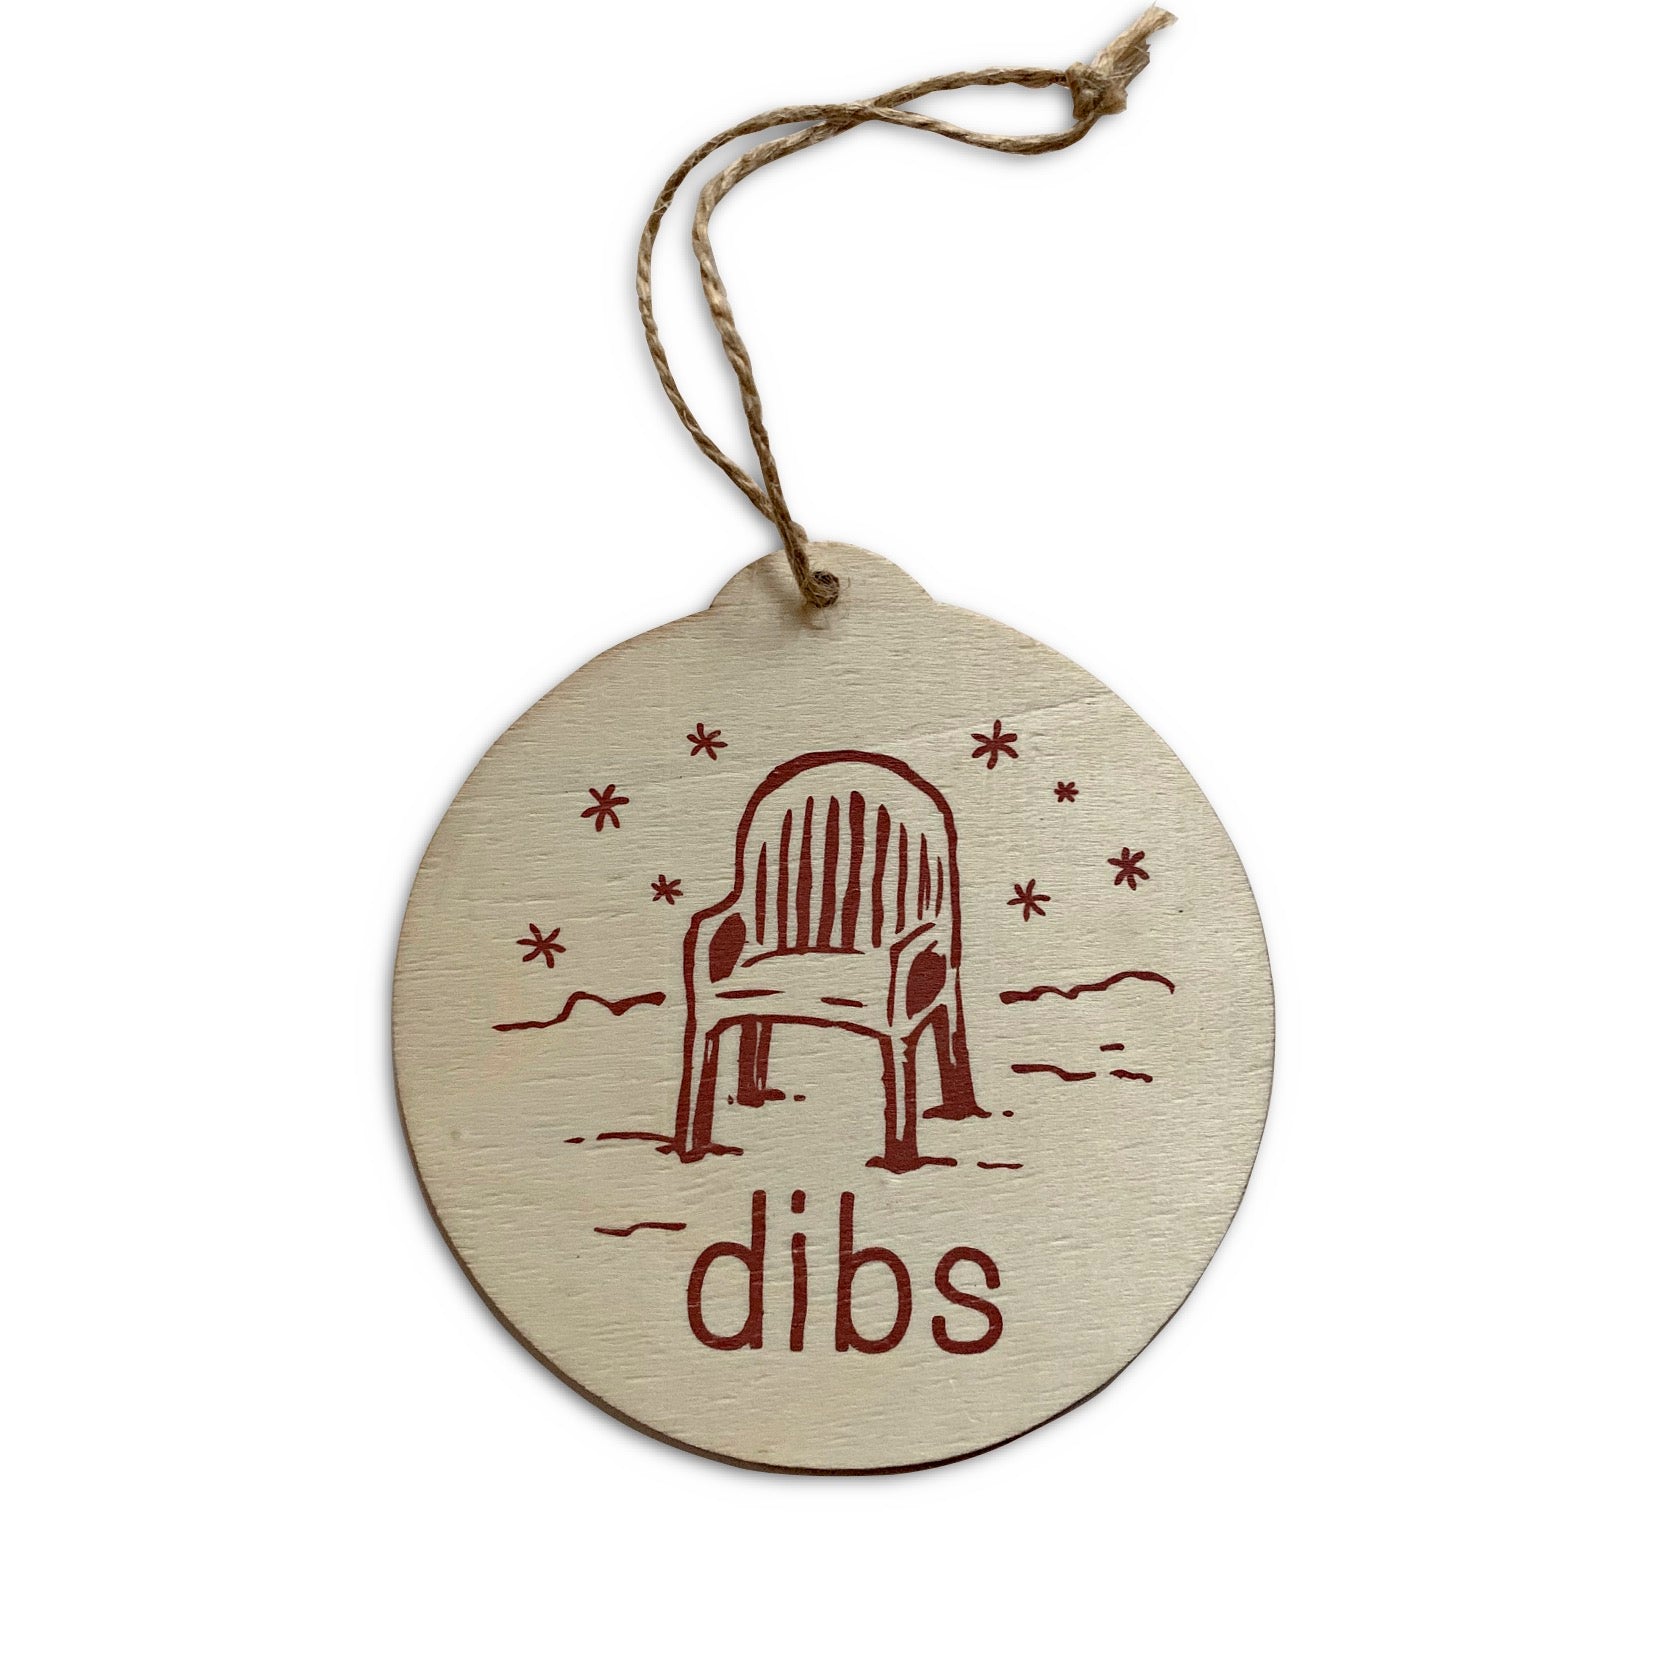 Chicago Dibs Ornament